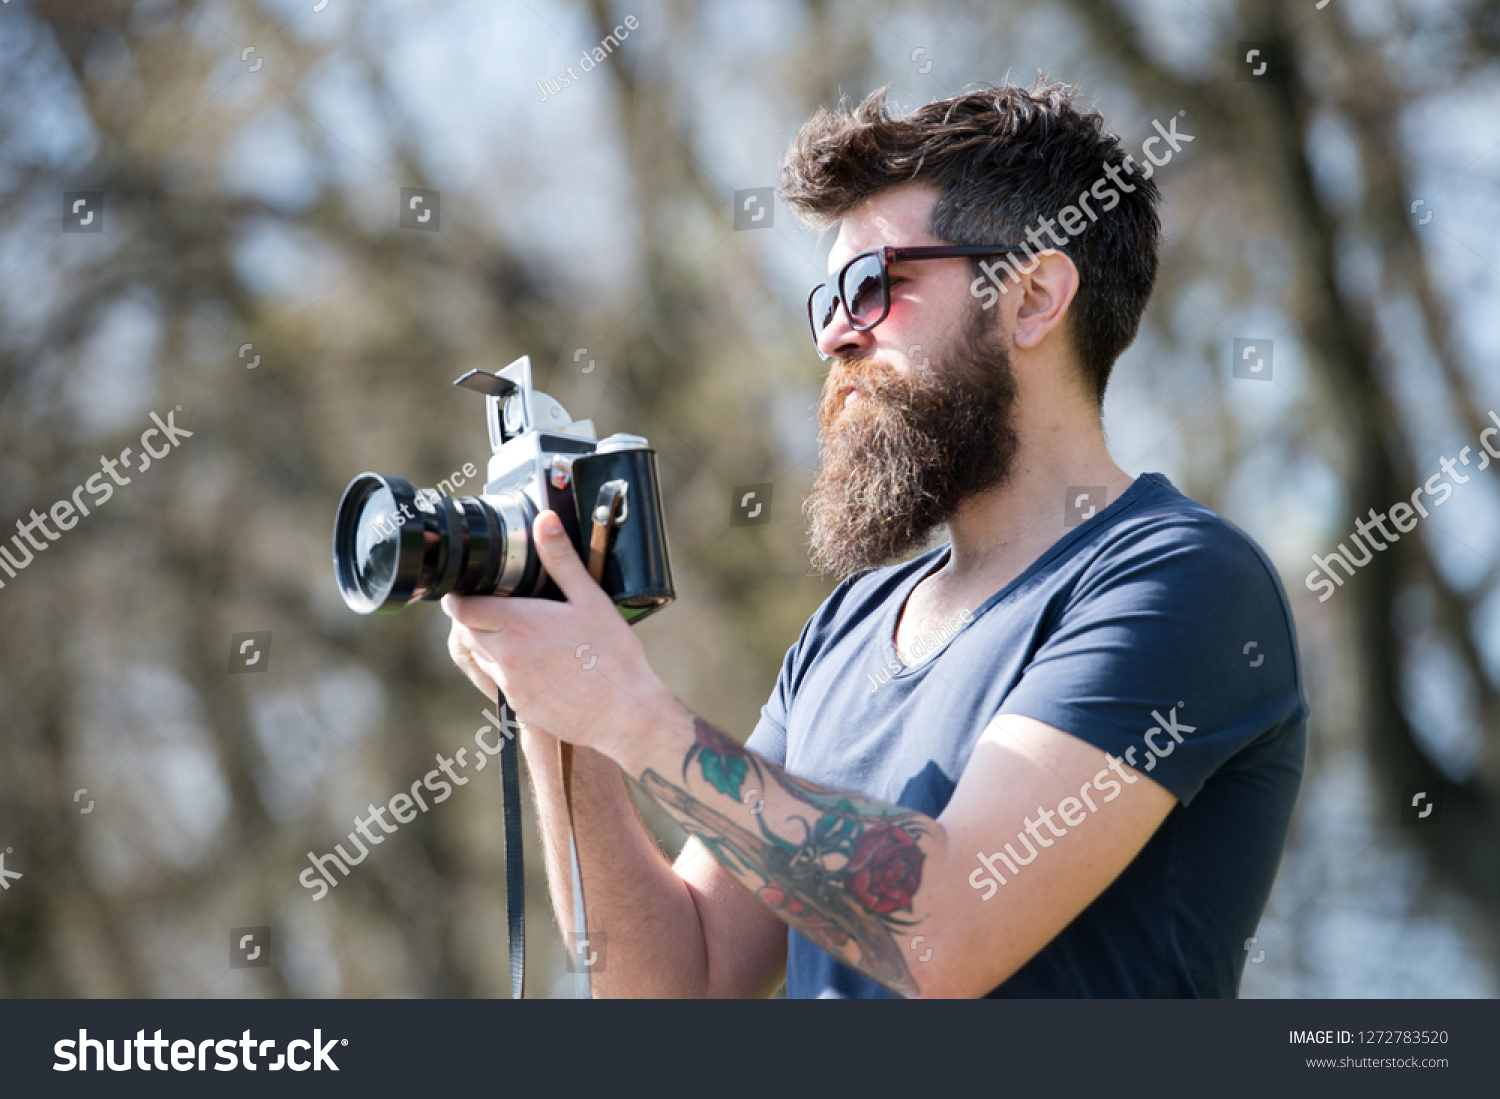 Man bearded hipster photographer hold vintage camera. Photographer with beard and mustache amateur photographer nature background. Man with long beard busy with shooting photos. Photographer concept. #1272783520